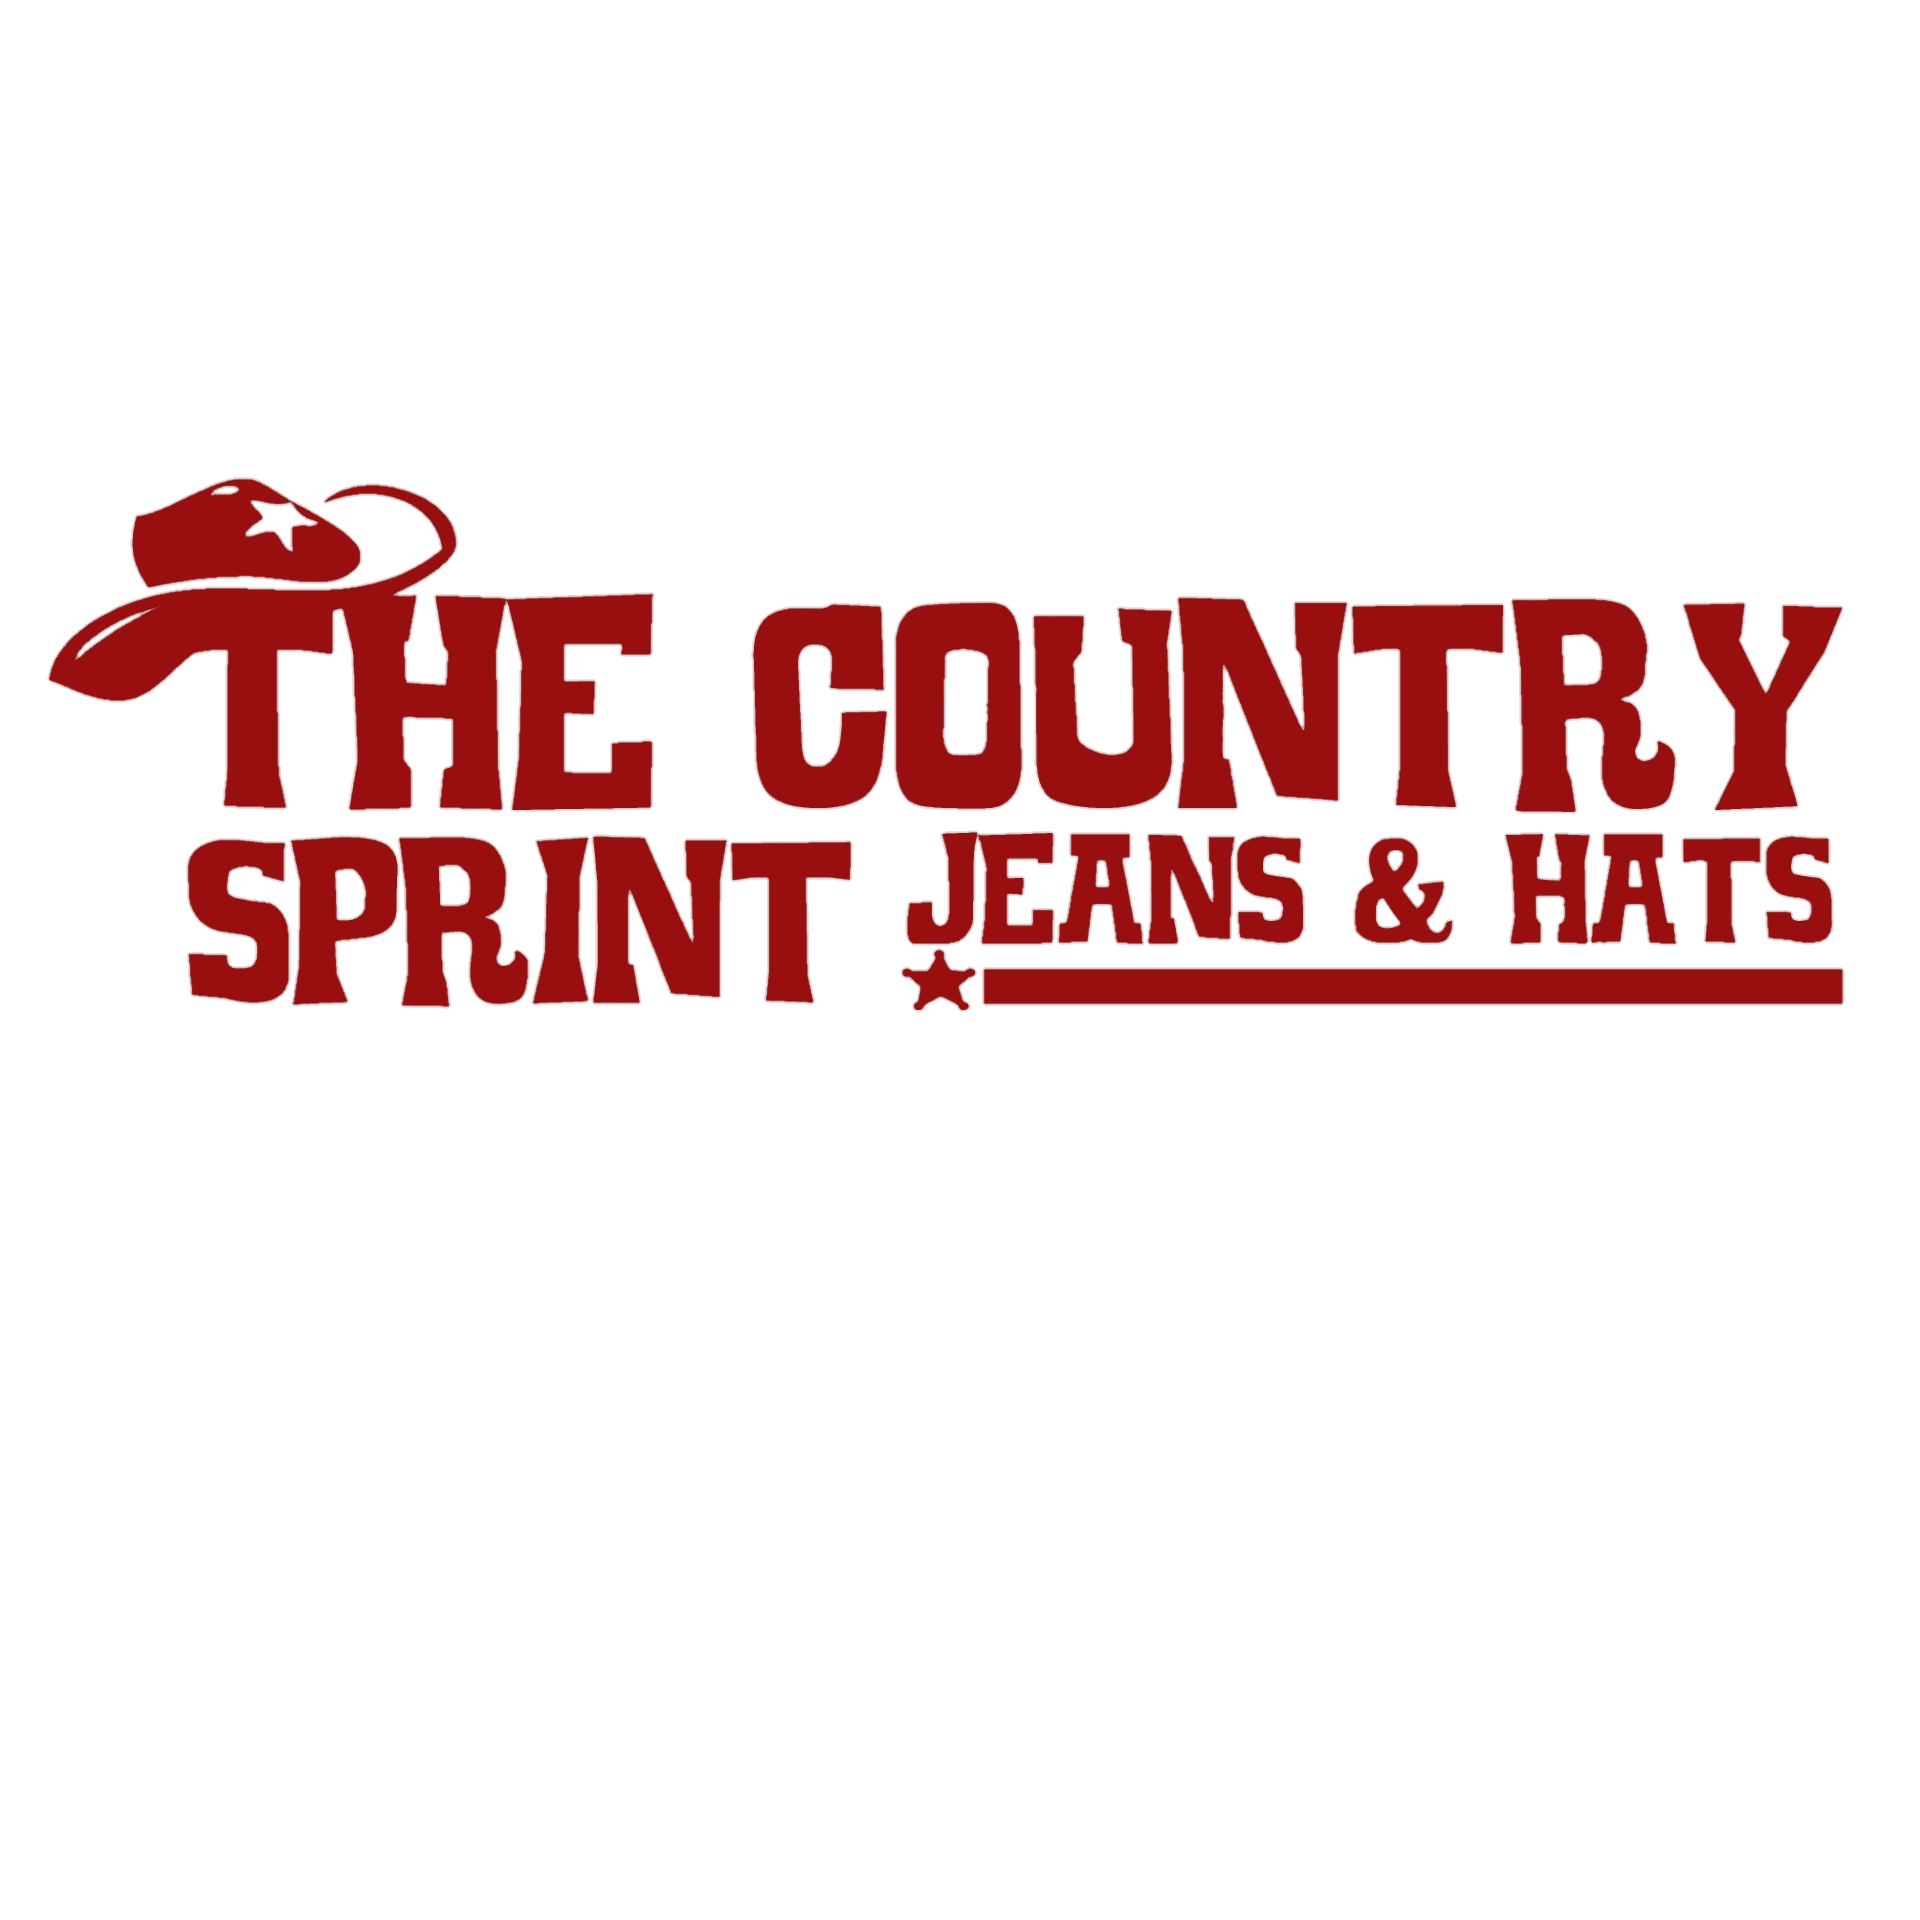 The Country Sprint